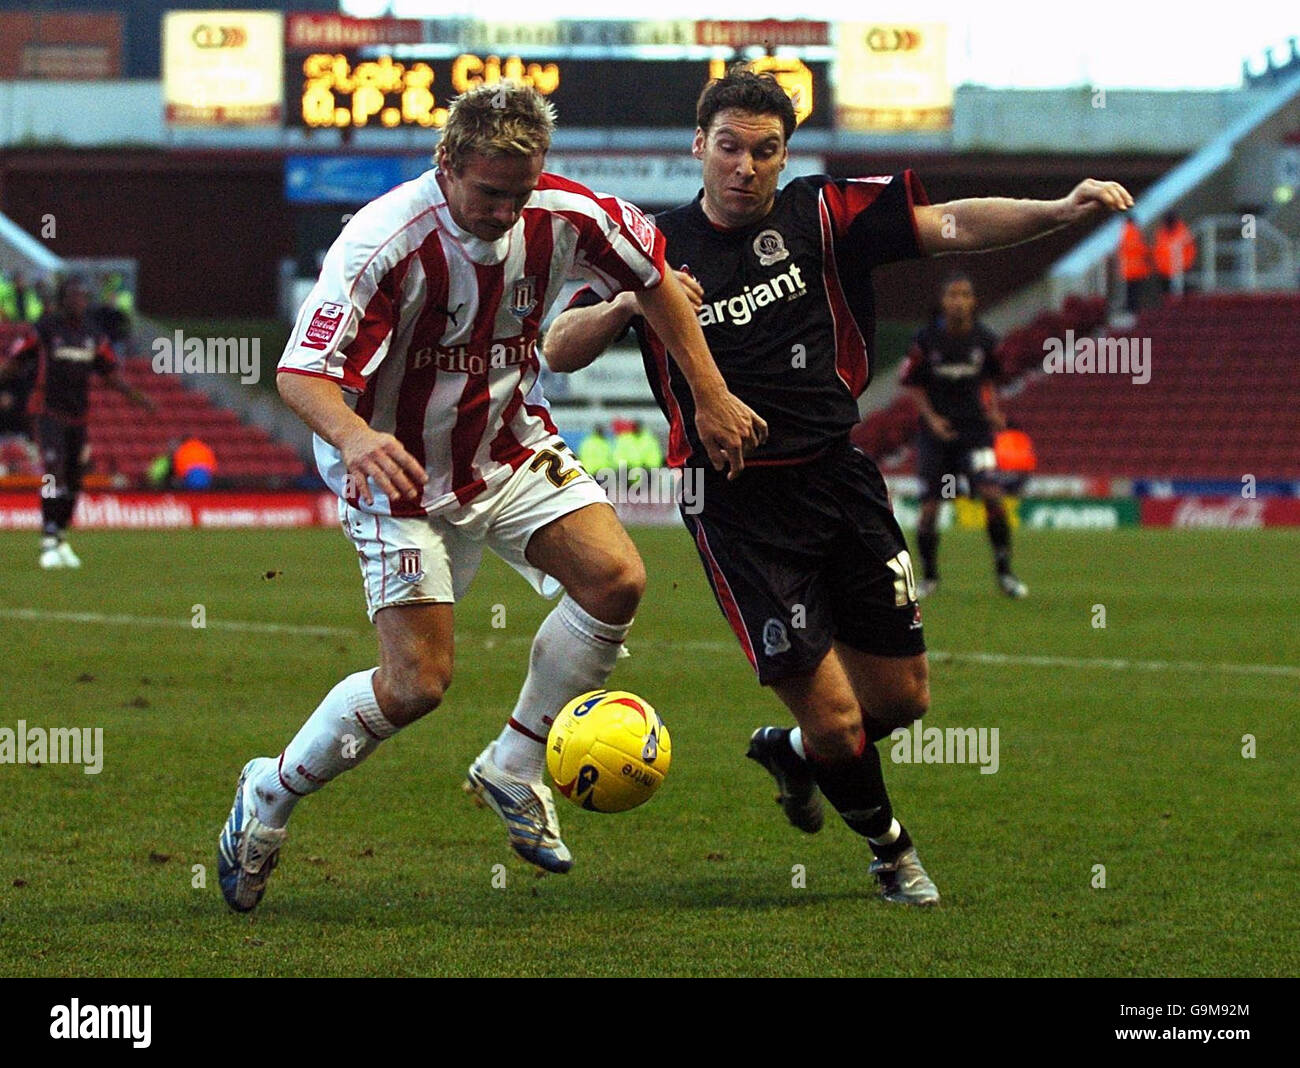 Stoke City's Liam Lawrence and Queens Park Rangers' Kevin Gallen during the Coca-Cola Championship match at the Britannia Stadium, Stoke. Stock Photo